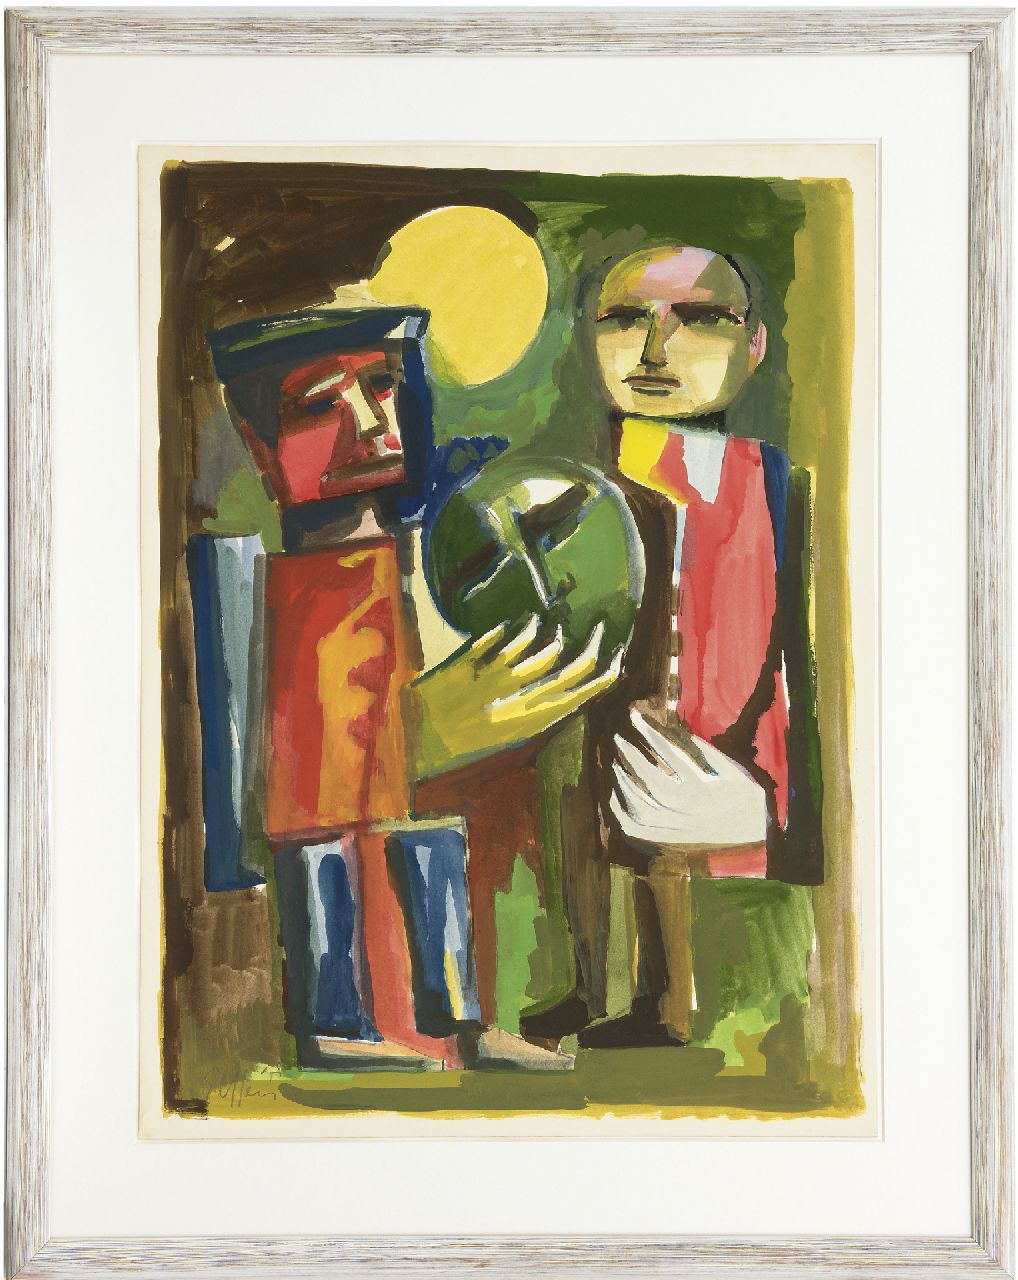 Elffers D.C.  | Dirk Cornelis 'Dick' Elffers, Two figures, gouache on paper 74.8 x 55.4 cm, signed l.l. and dated '58